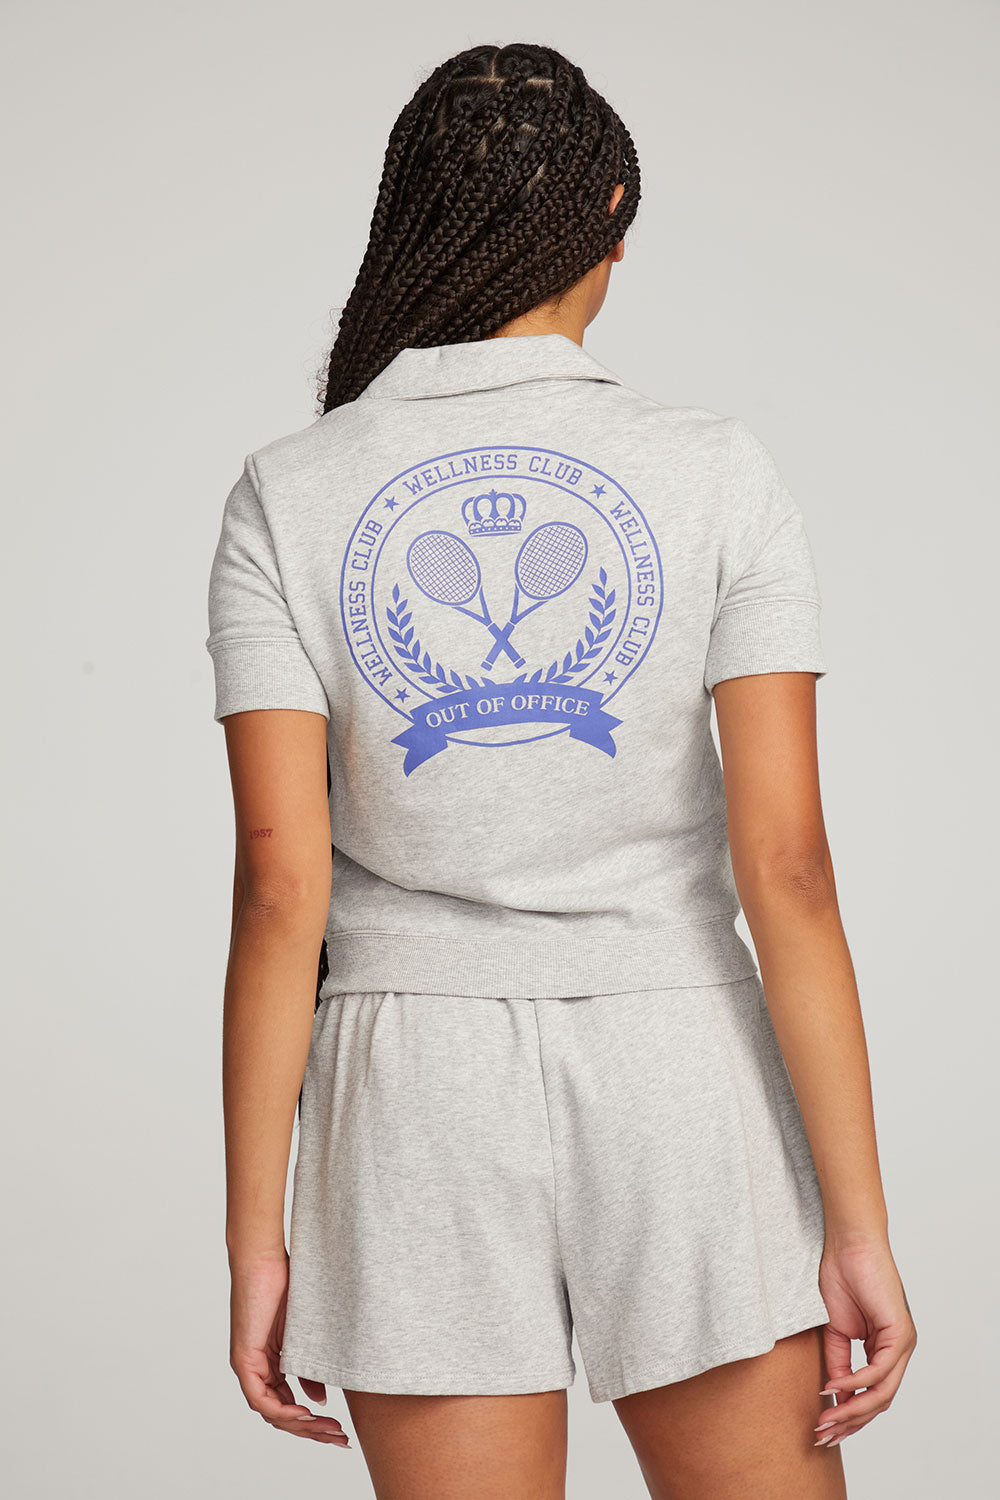 Out Of Office Tee WOMENS chaserbrand